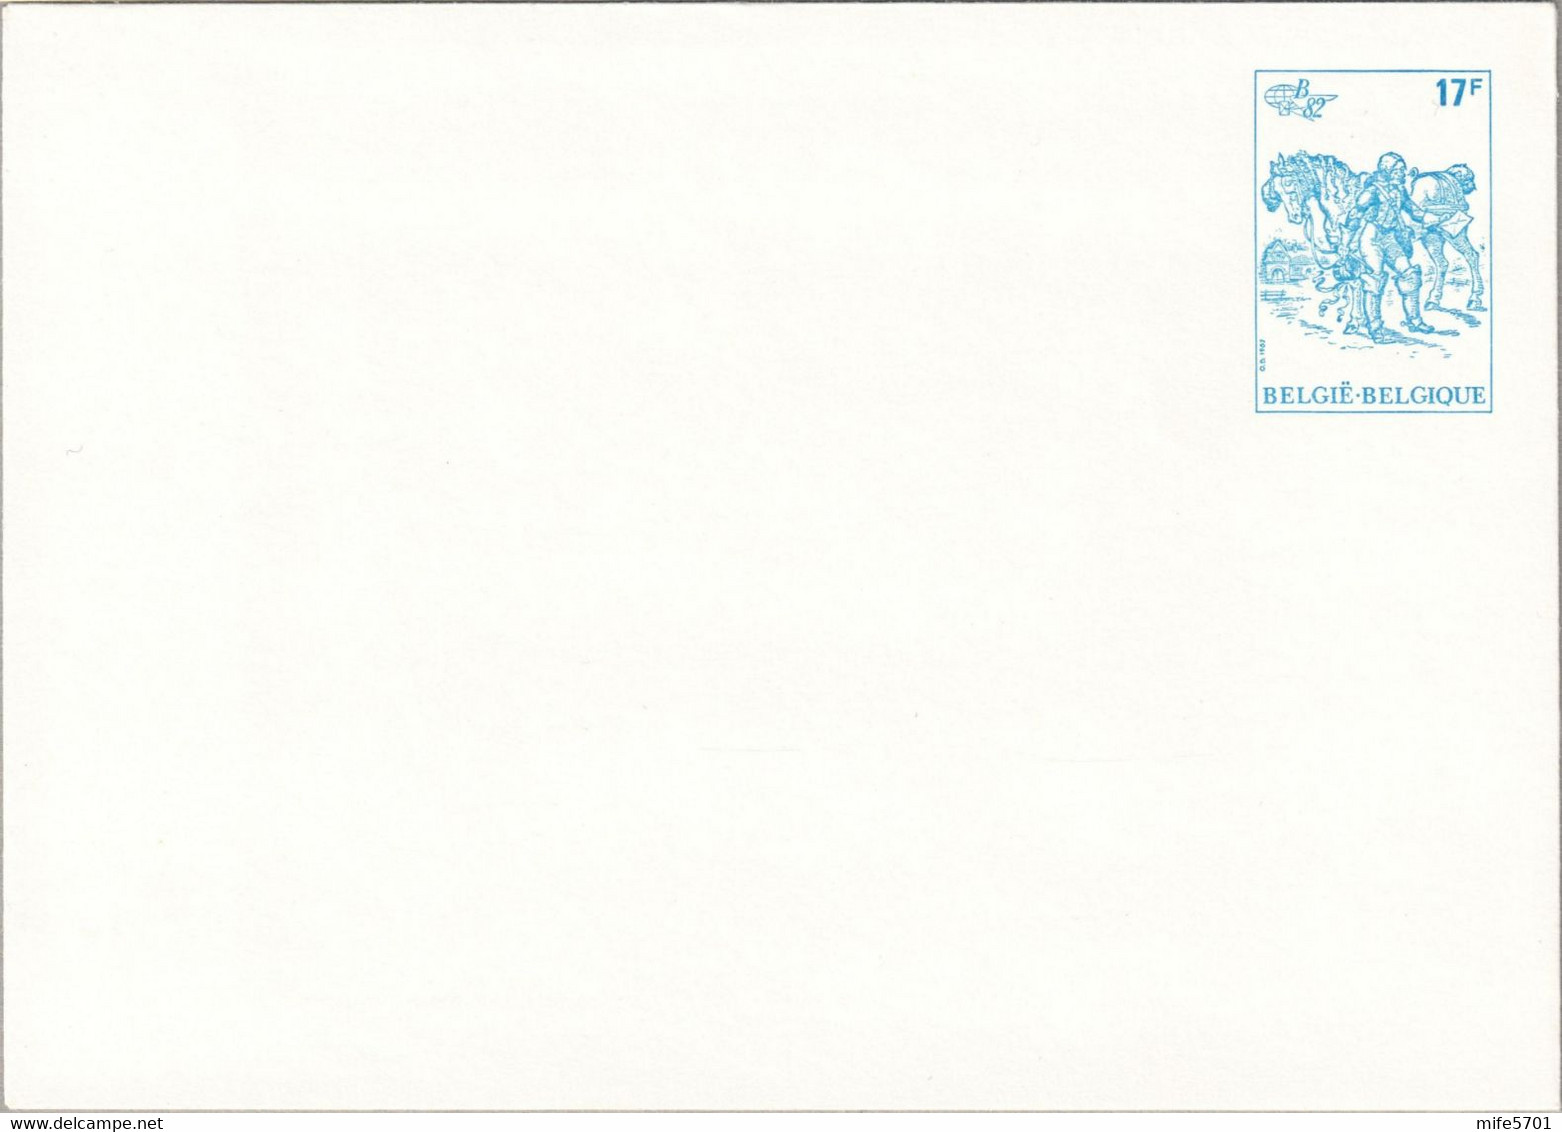 BELGIO / BELGIQUE 1982 - ENVELOPPE PREAFFRANCHIE A 17F 'BELGICA 82' - NUOVO / NEUF - Covers